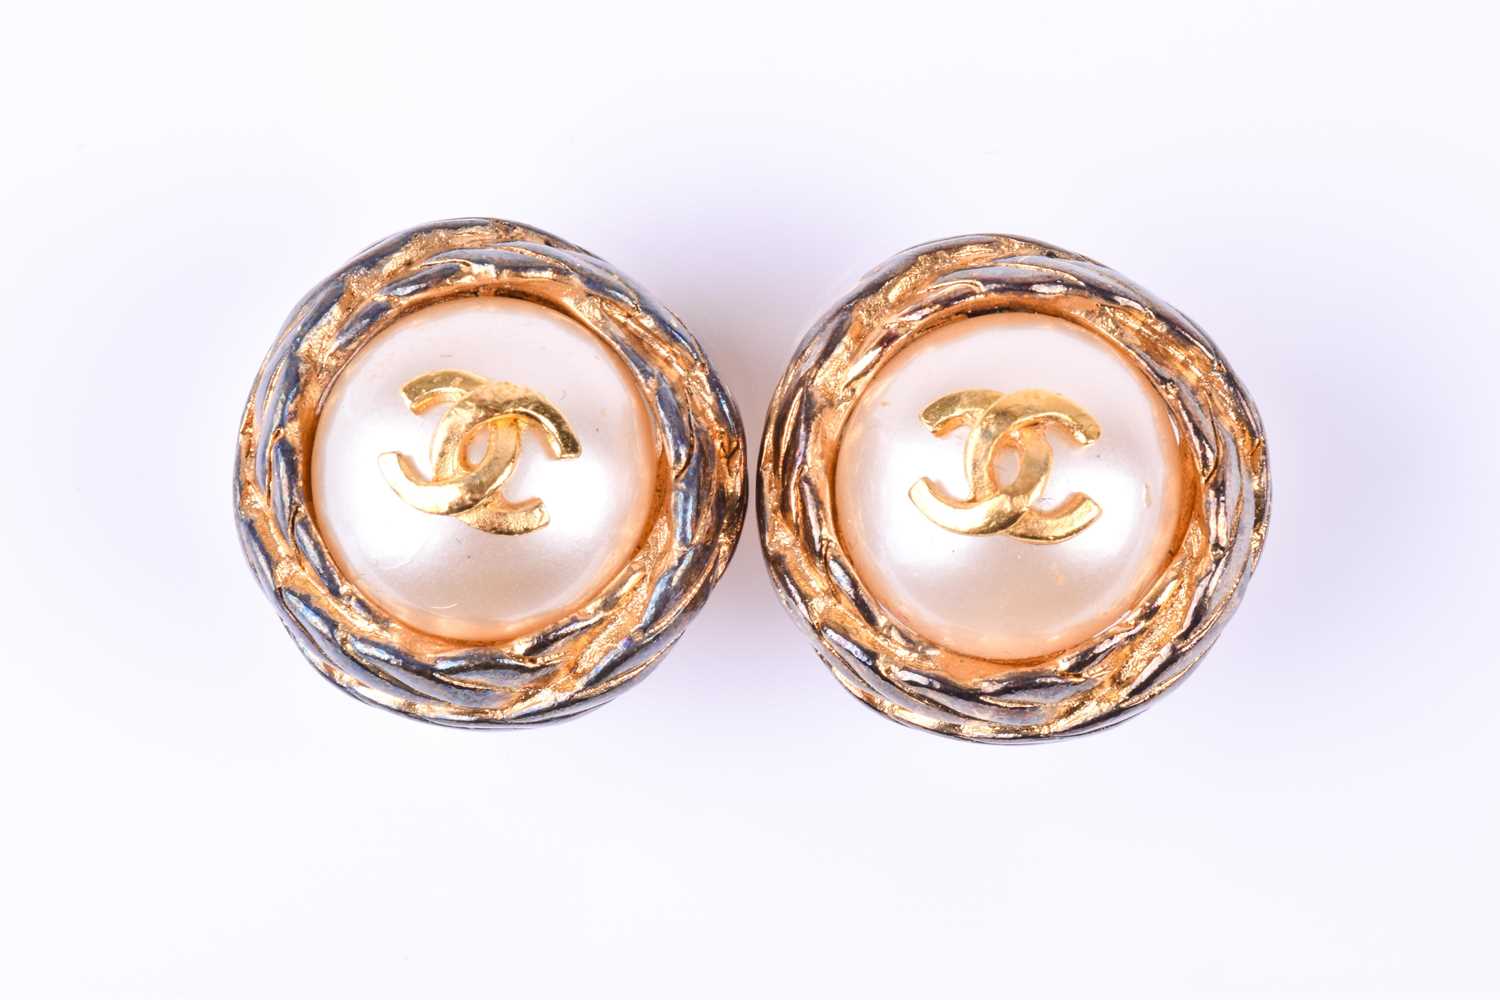 A pair of vintage Chanel earrings, the faux pearls bearing gilt metal CC logo within a woven